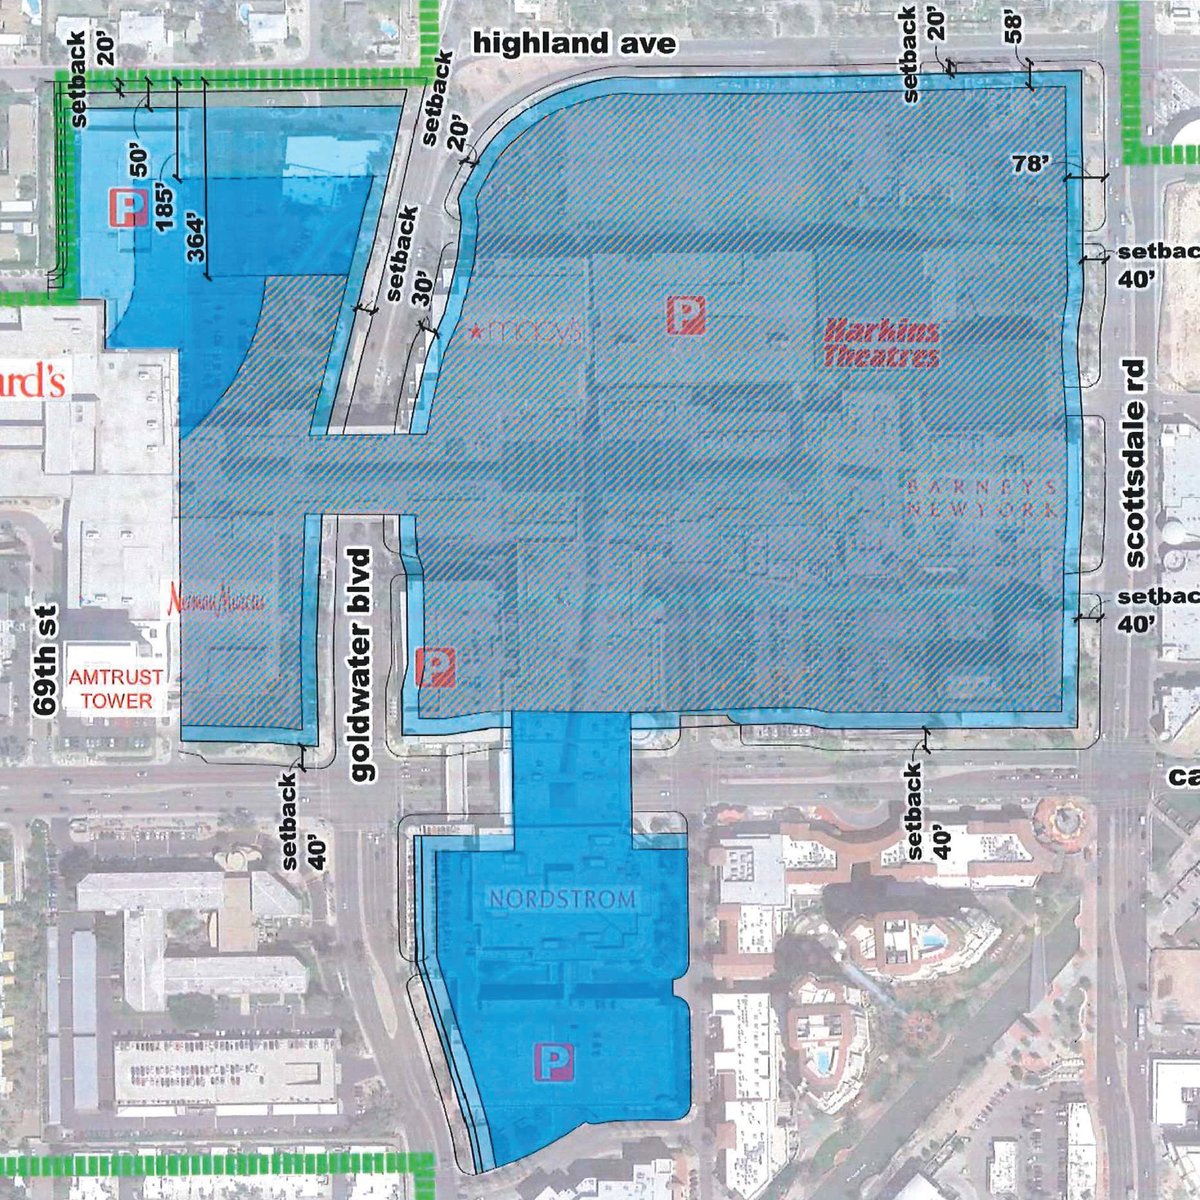 Macerich Announces Mixed-Use Expansion at Scottsdale Fashion Square –  Macerich